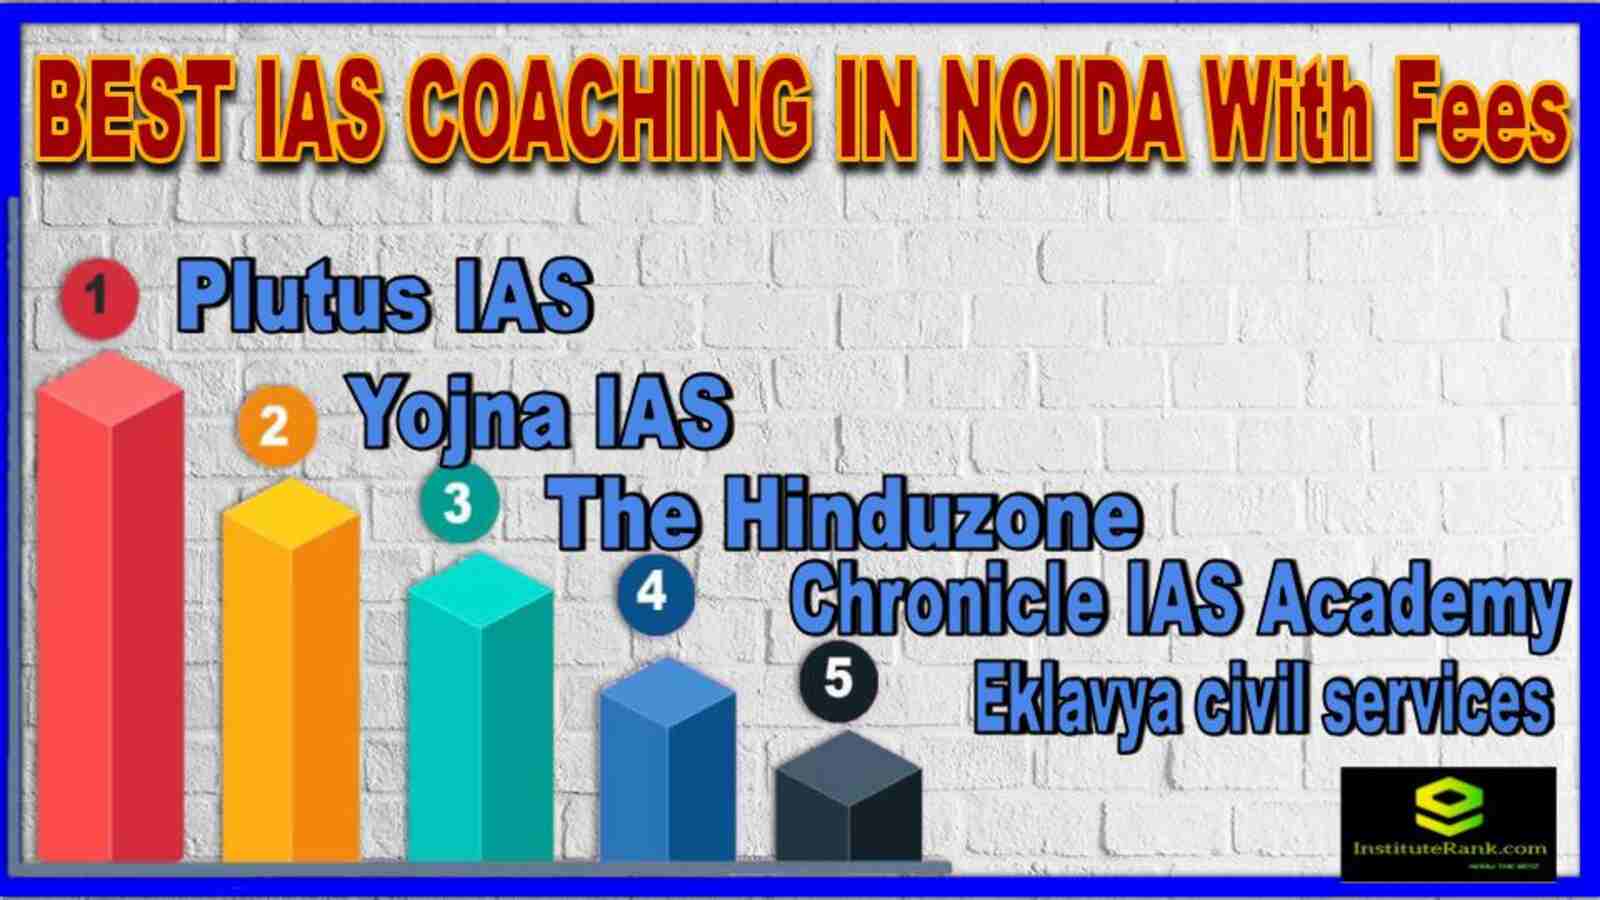 BEST IAS COACHING IN NOIDA With Fees